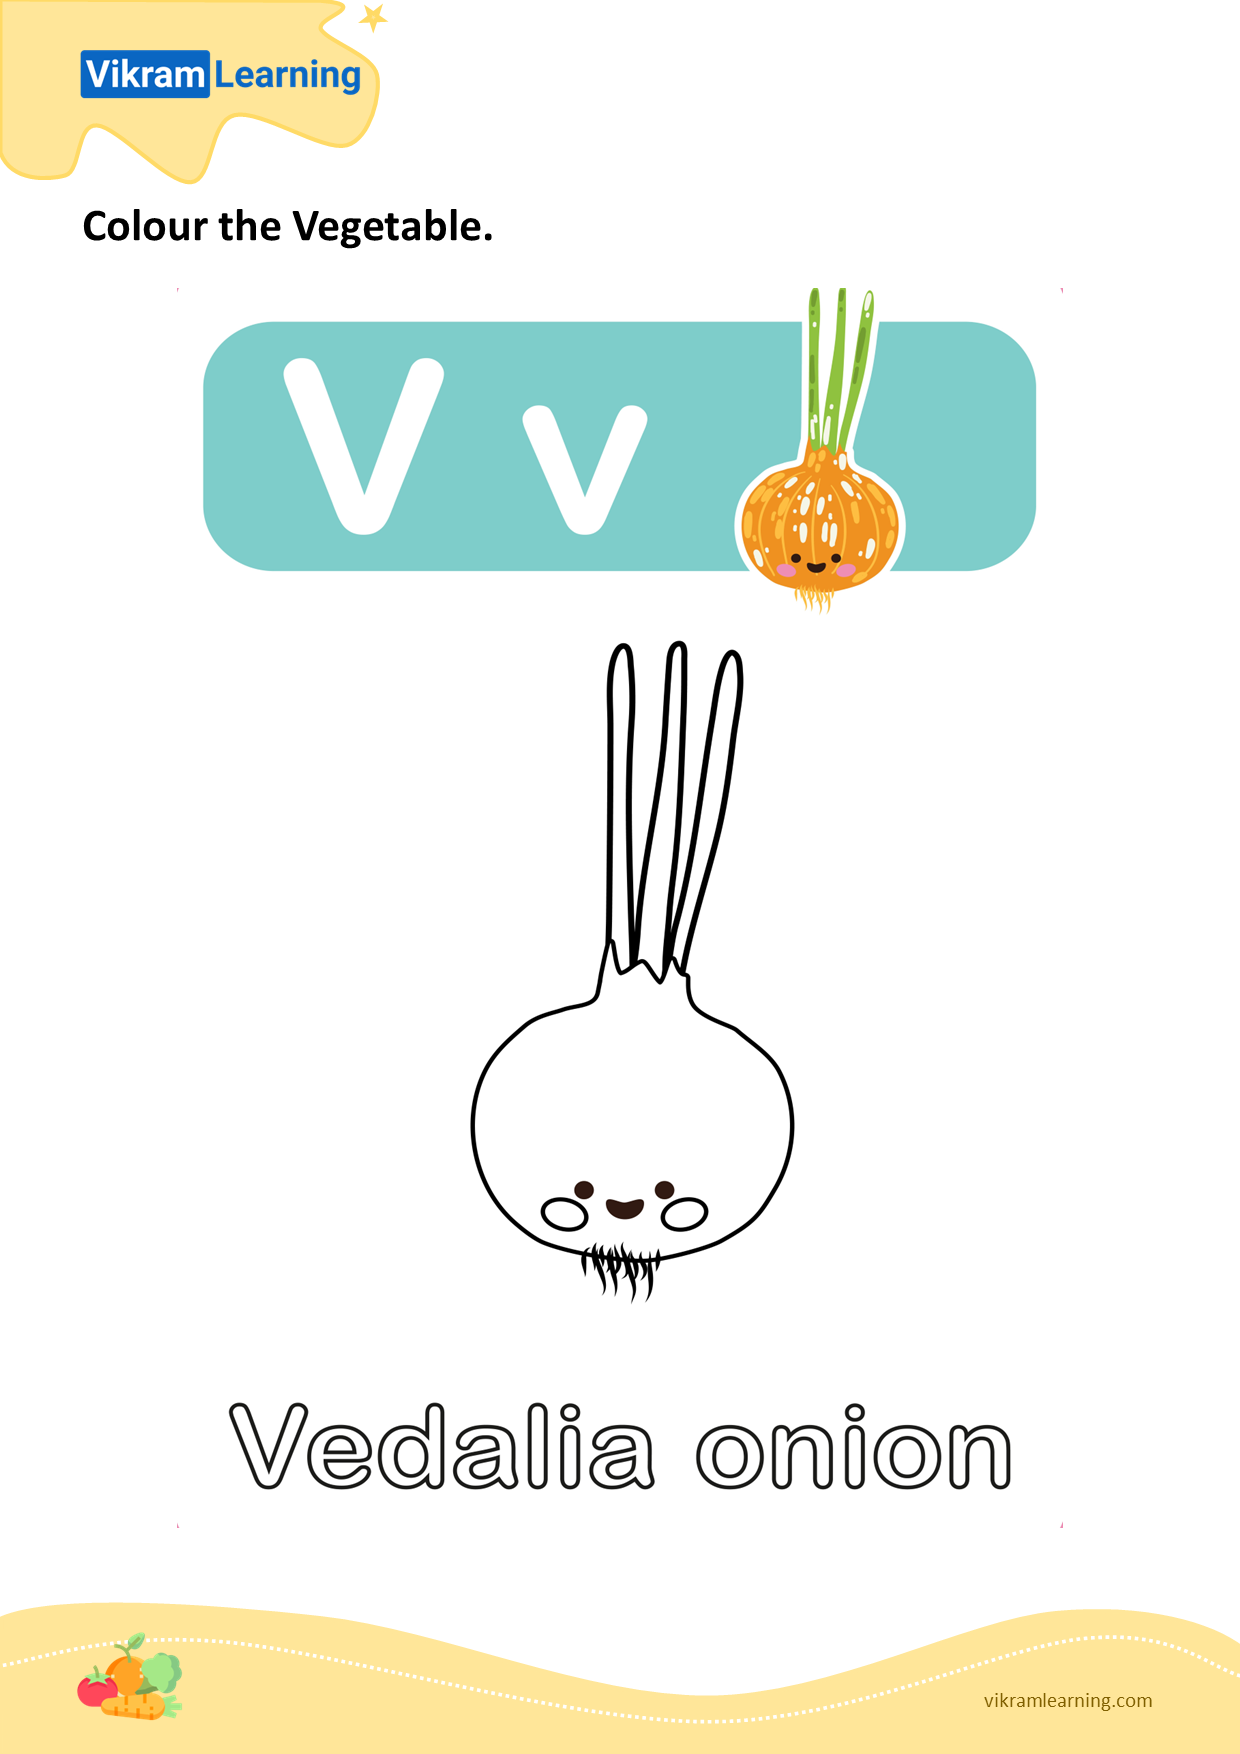 Download colour the vegetable - vedalia onion worksheets